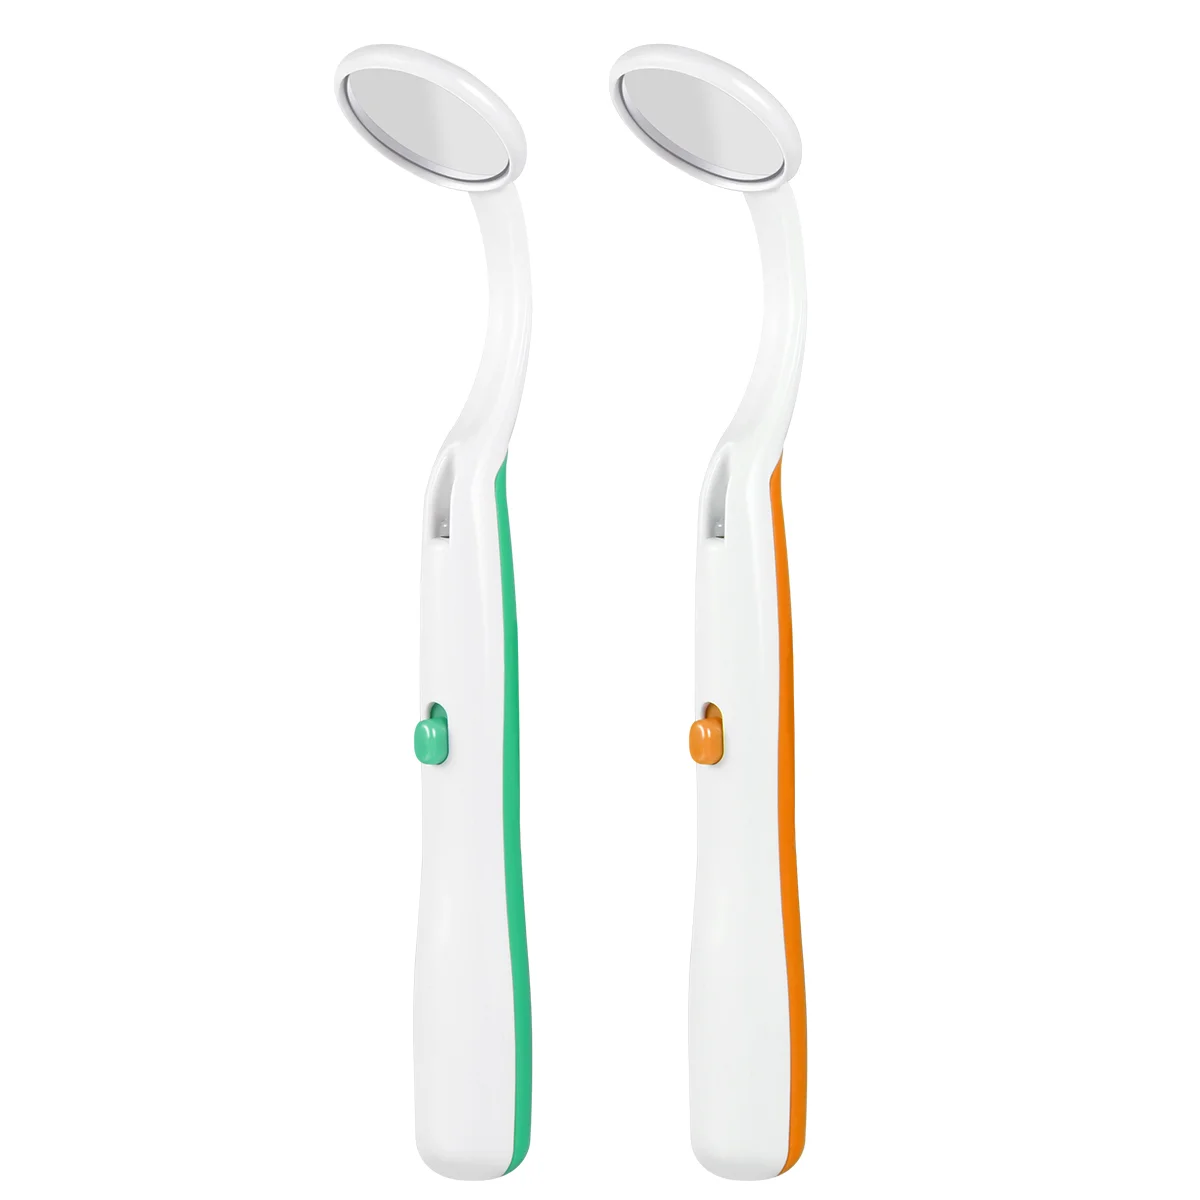 

Healifty 2PCS Oral Dental Mirror Mouth Tooth Inspection Mirror with Bright LED Light for Dental Care (Green and Orange)